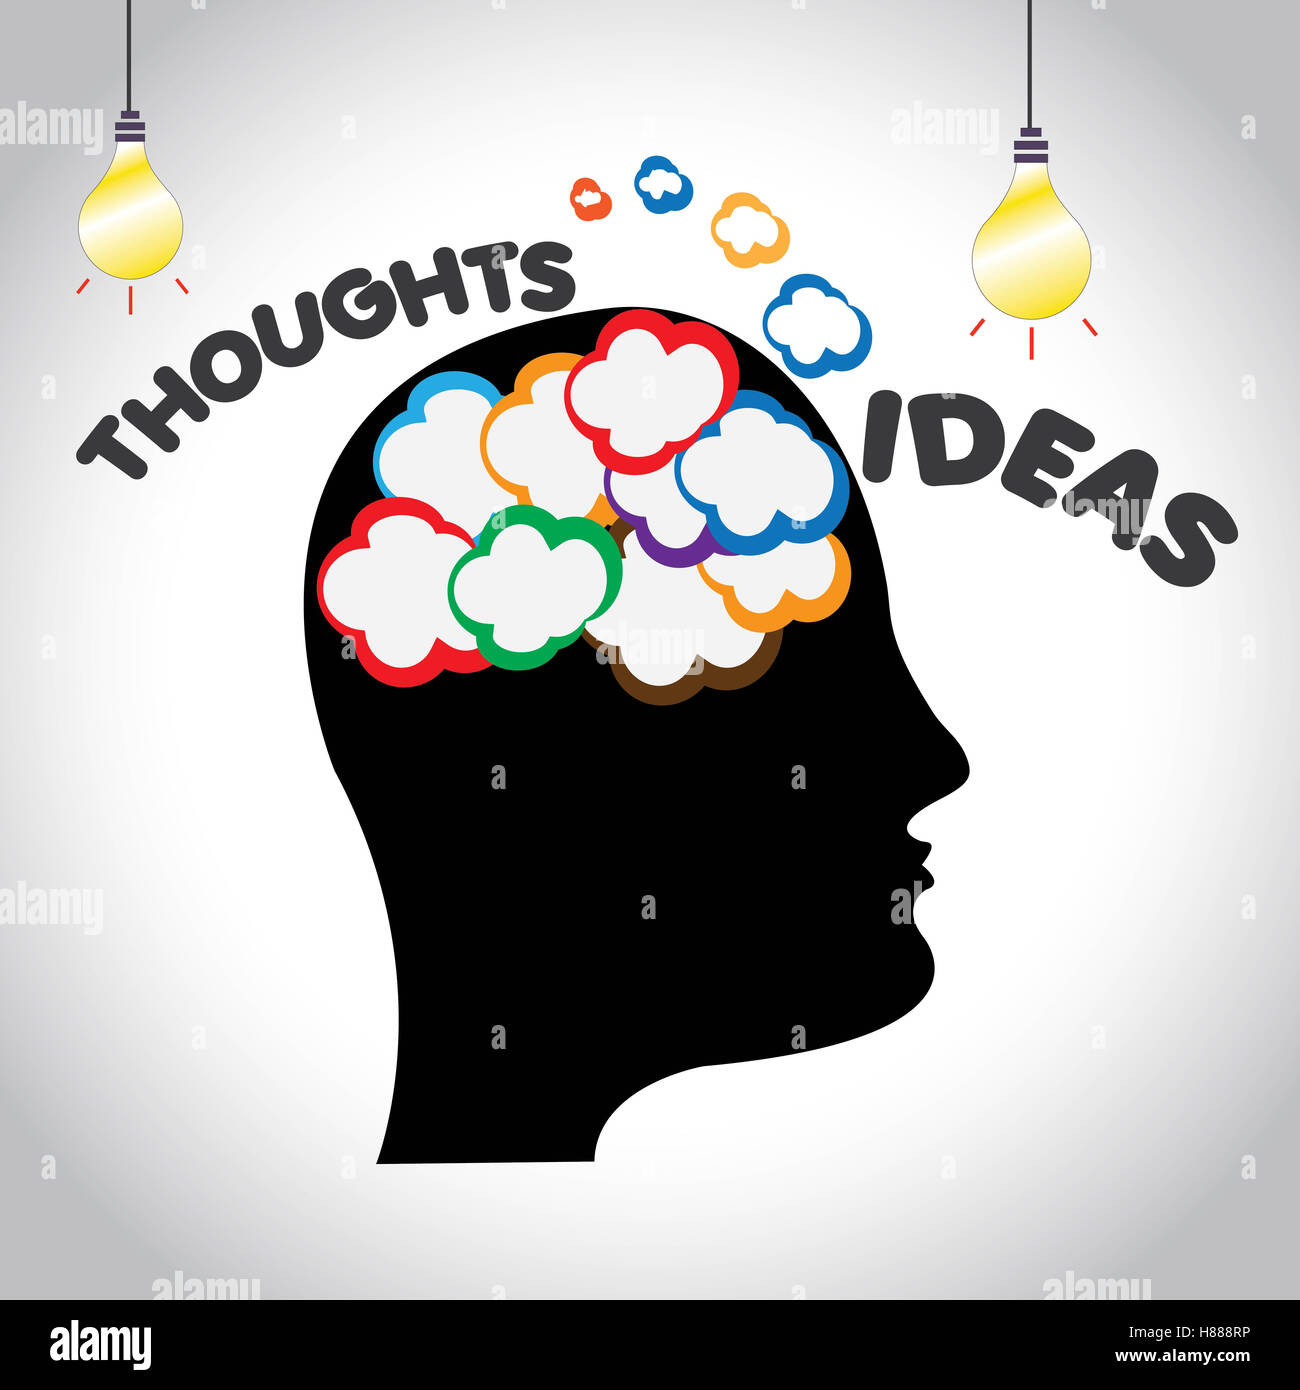 Concept Of Creative Thoughts And Ideas In Human Brain Illustration